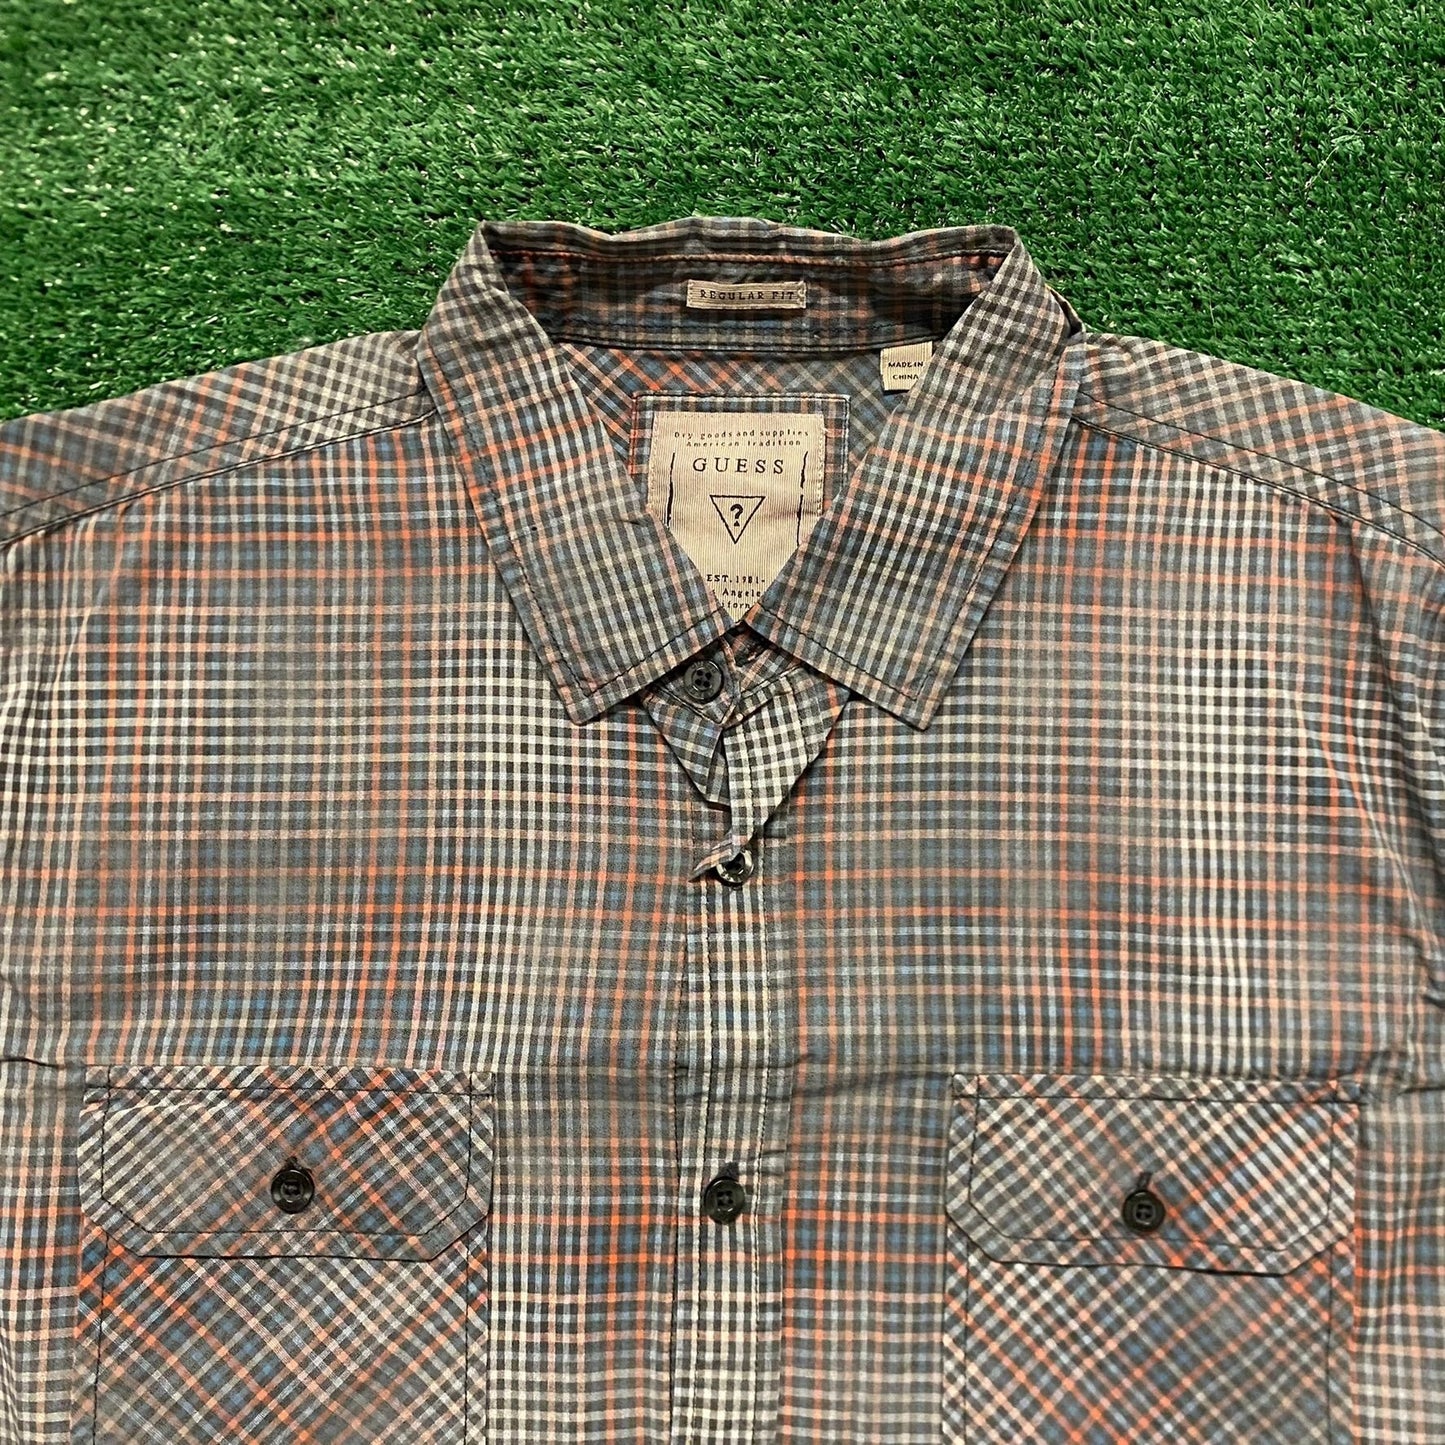 Guess Plaid Check Vintage Casual Button Up Shirt